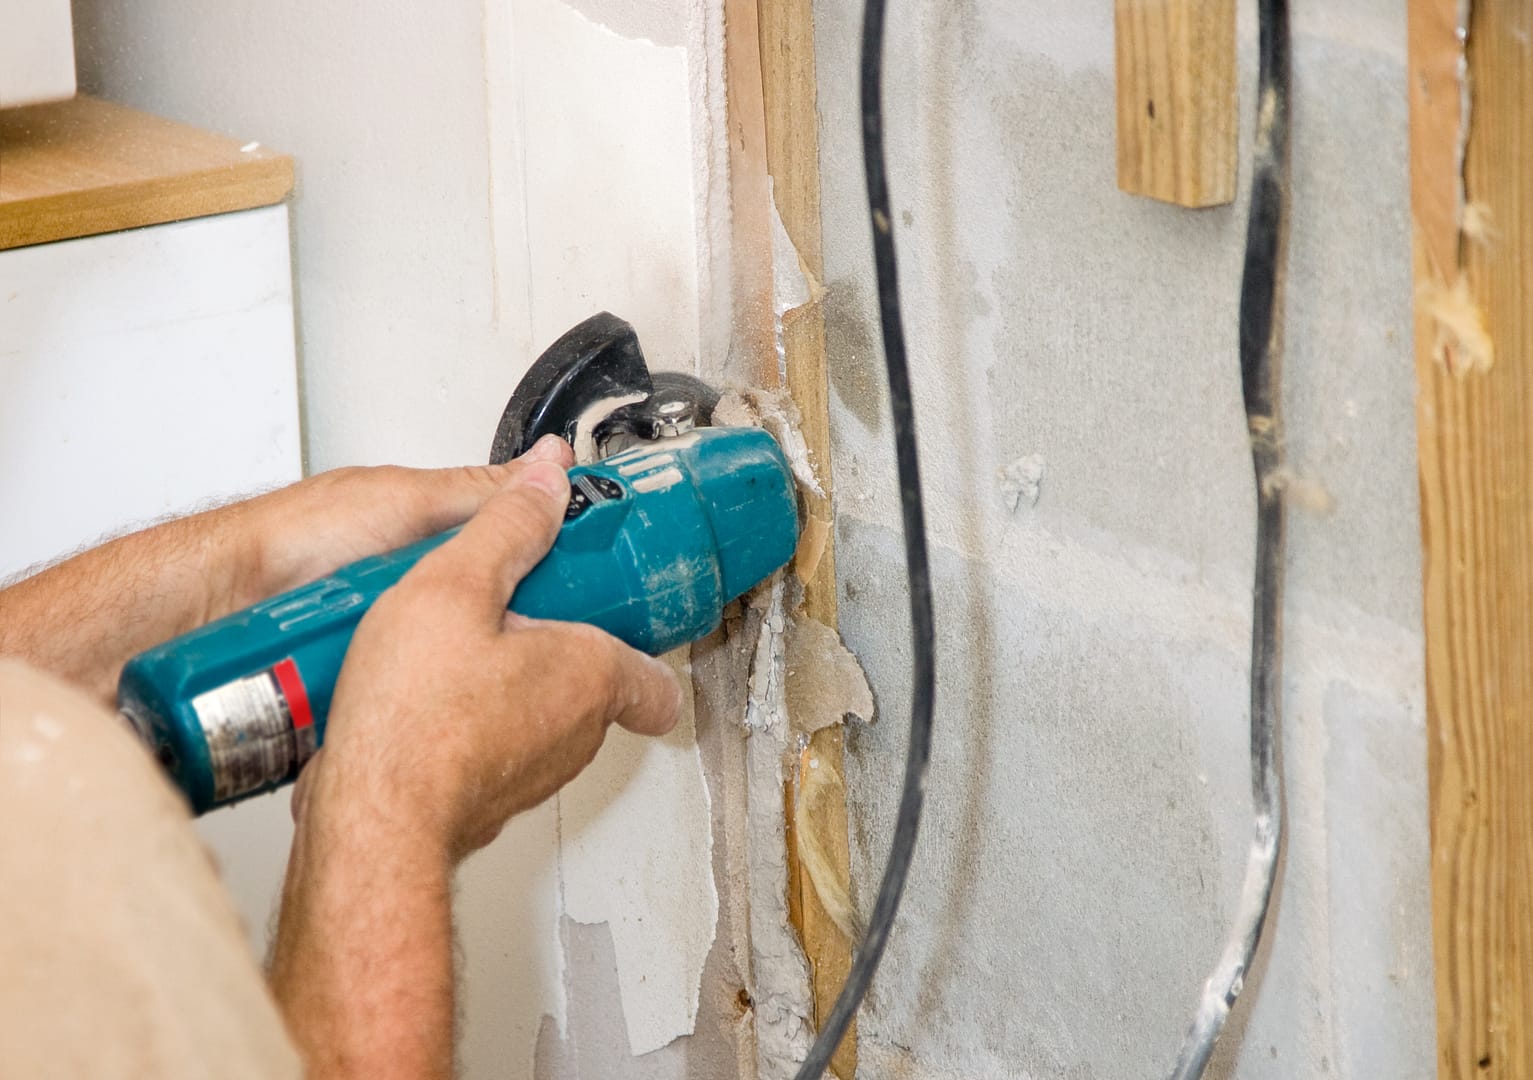 Contractor using an angle grinder to cut through a section of drywall, producing sparks and fine dust as the tool's rotating disc makes contact with the wall material.